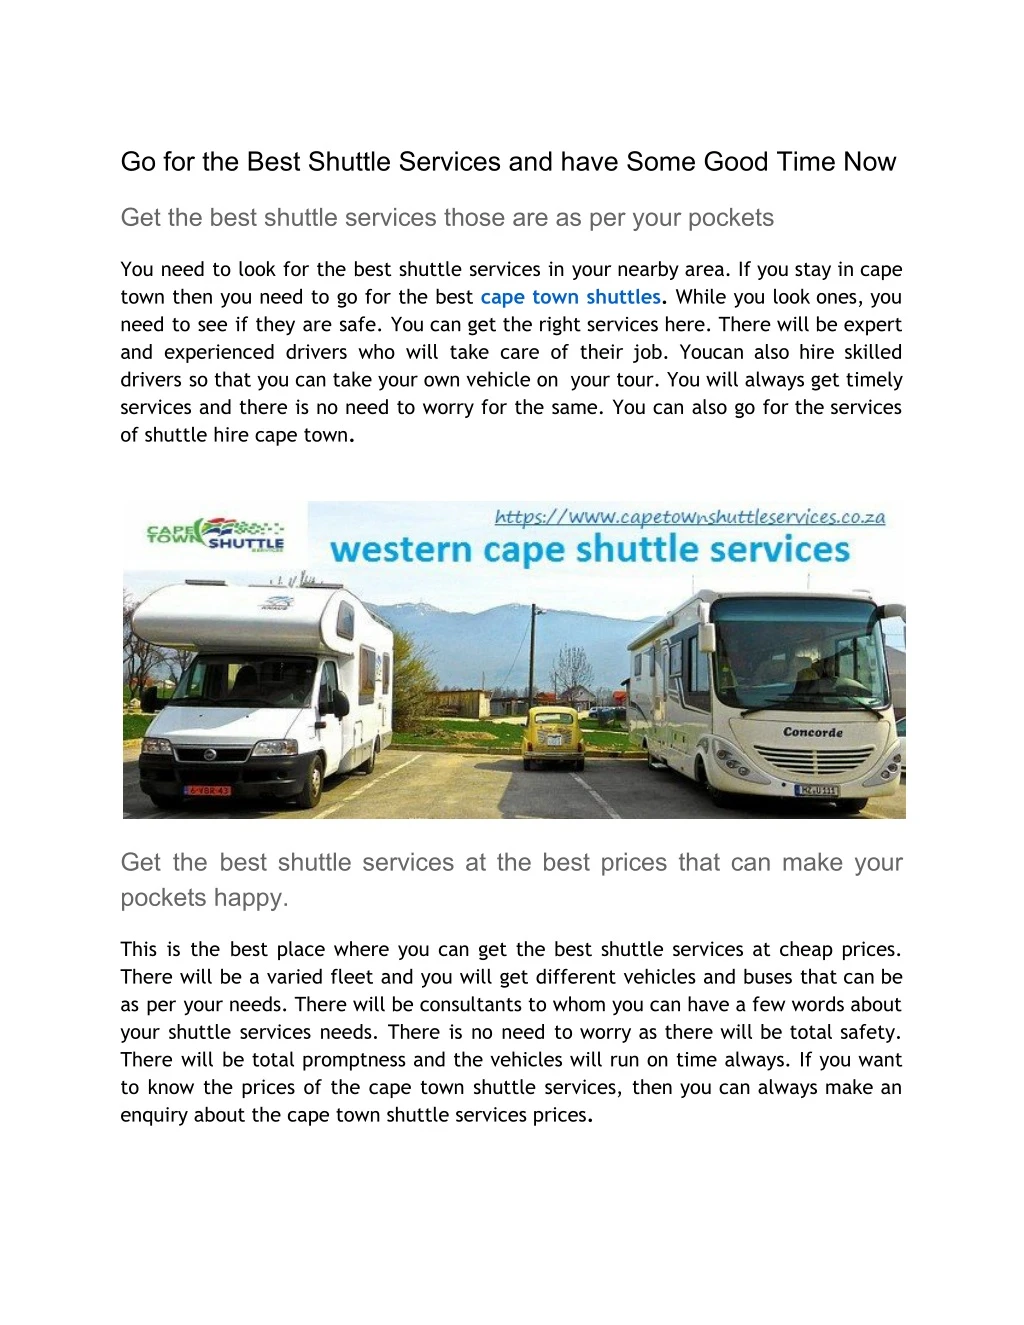 go for the best shuttle services and have some